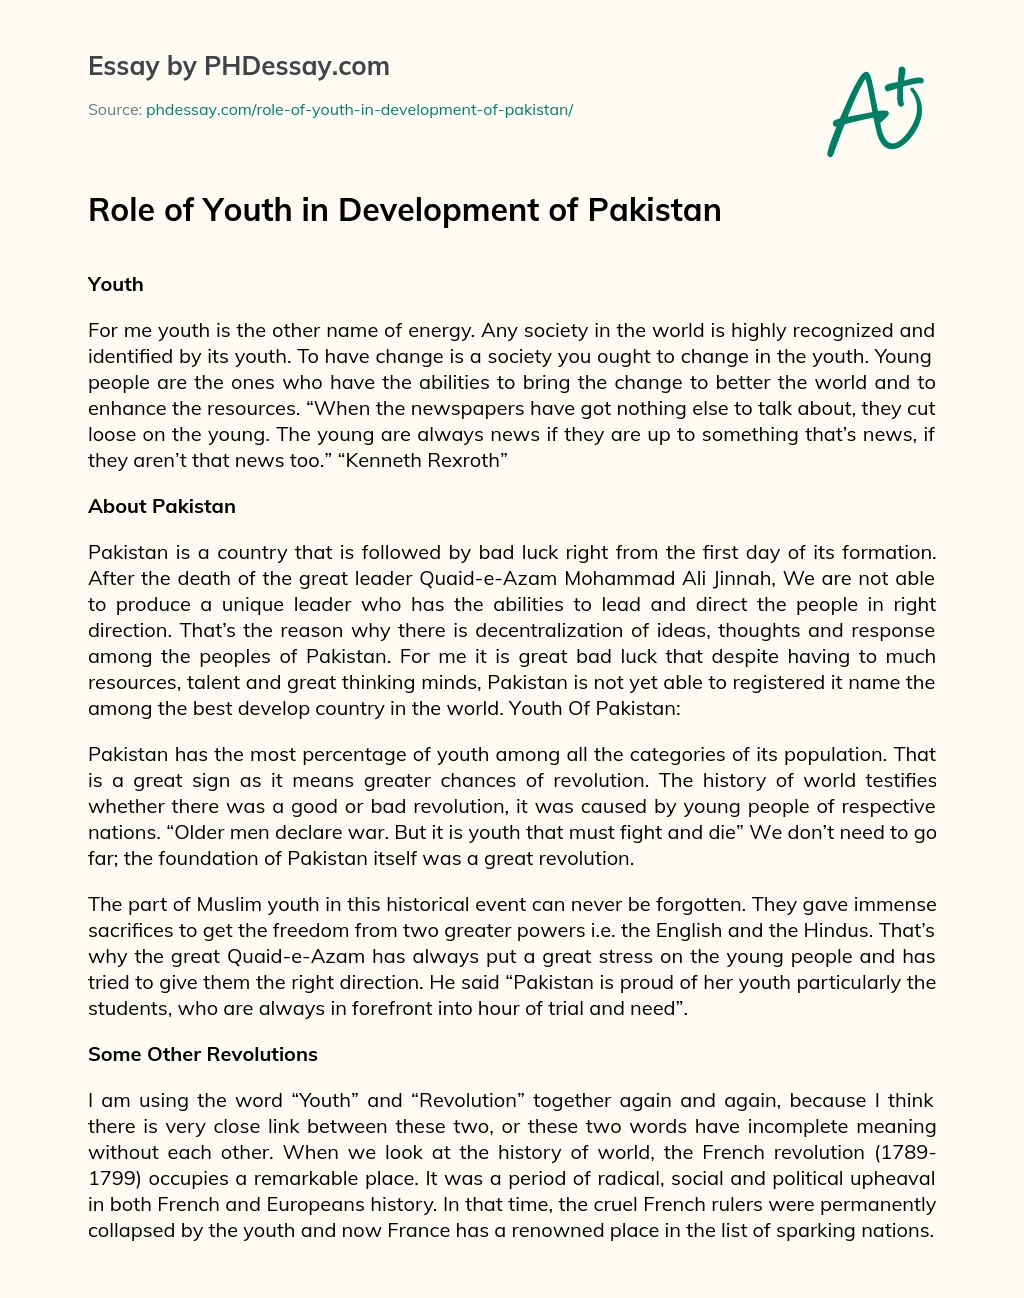 Role of Youth in Development of Pakistan essay